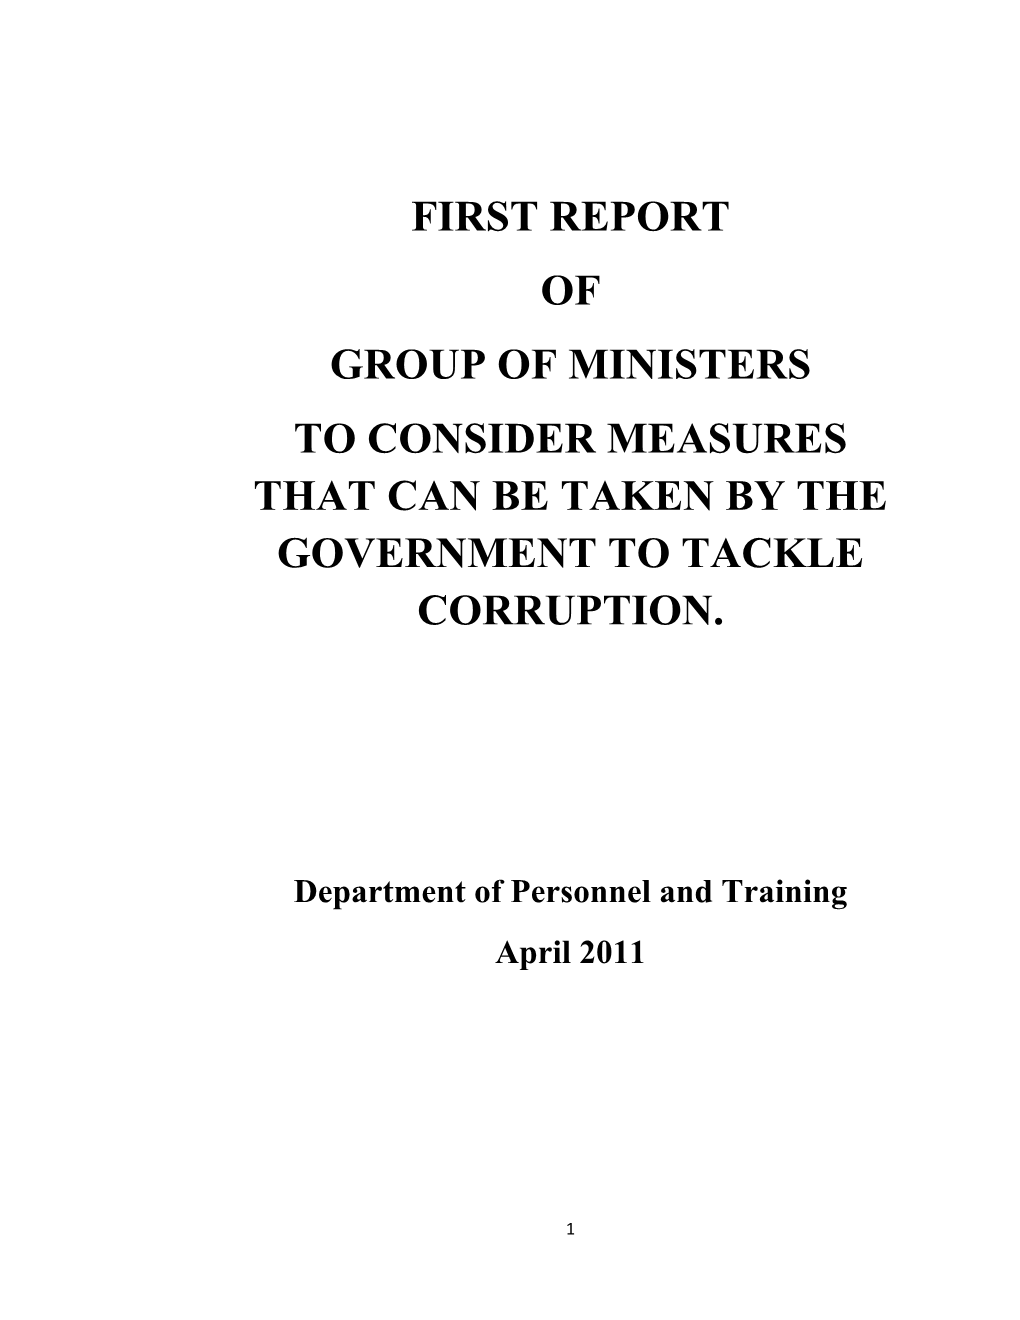 First Report of Group of Ministers to Consider Measures That Can Be Taken by the Government to Tackle Corruption